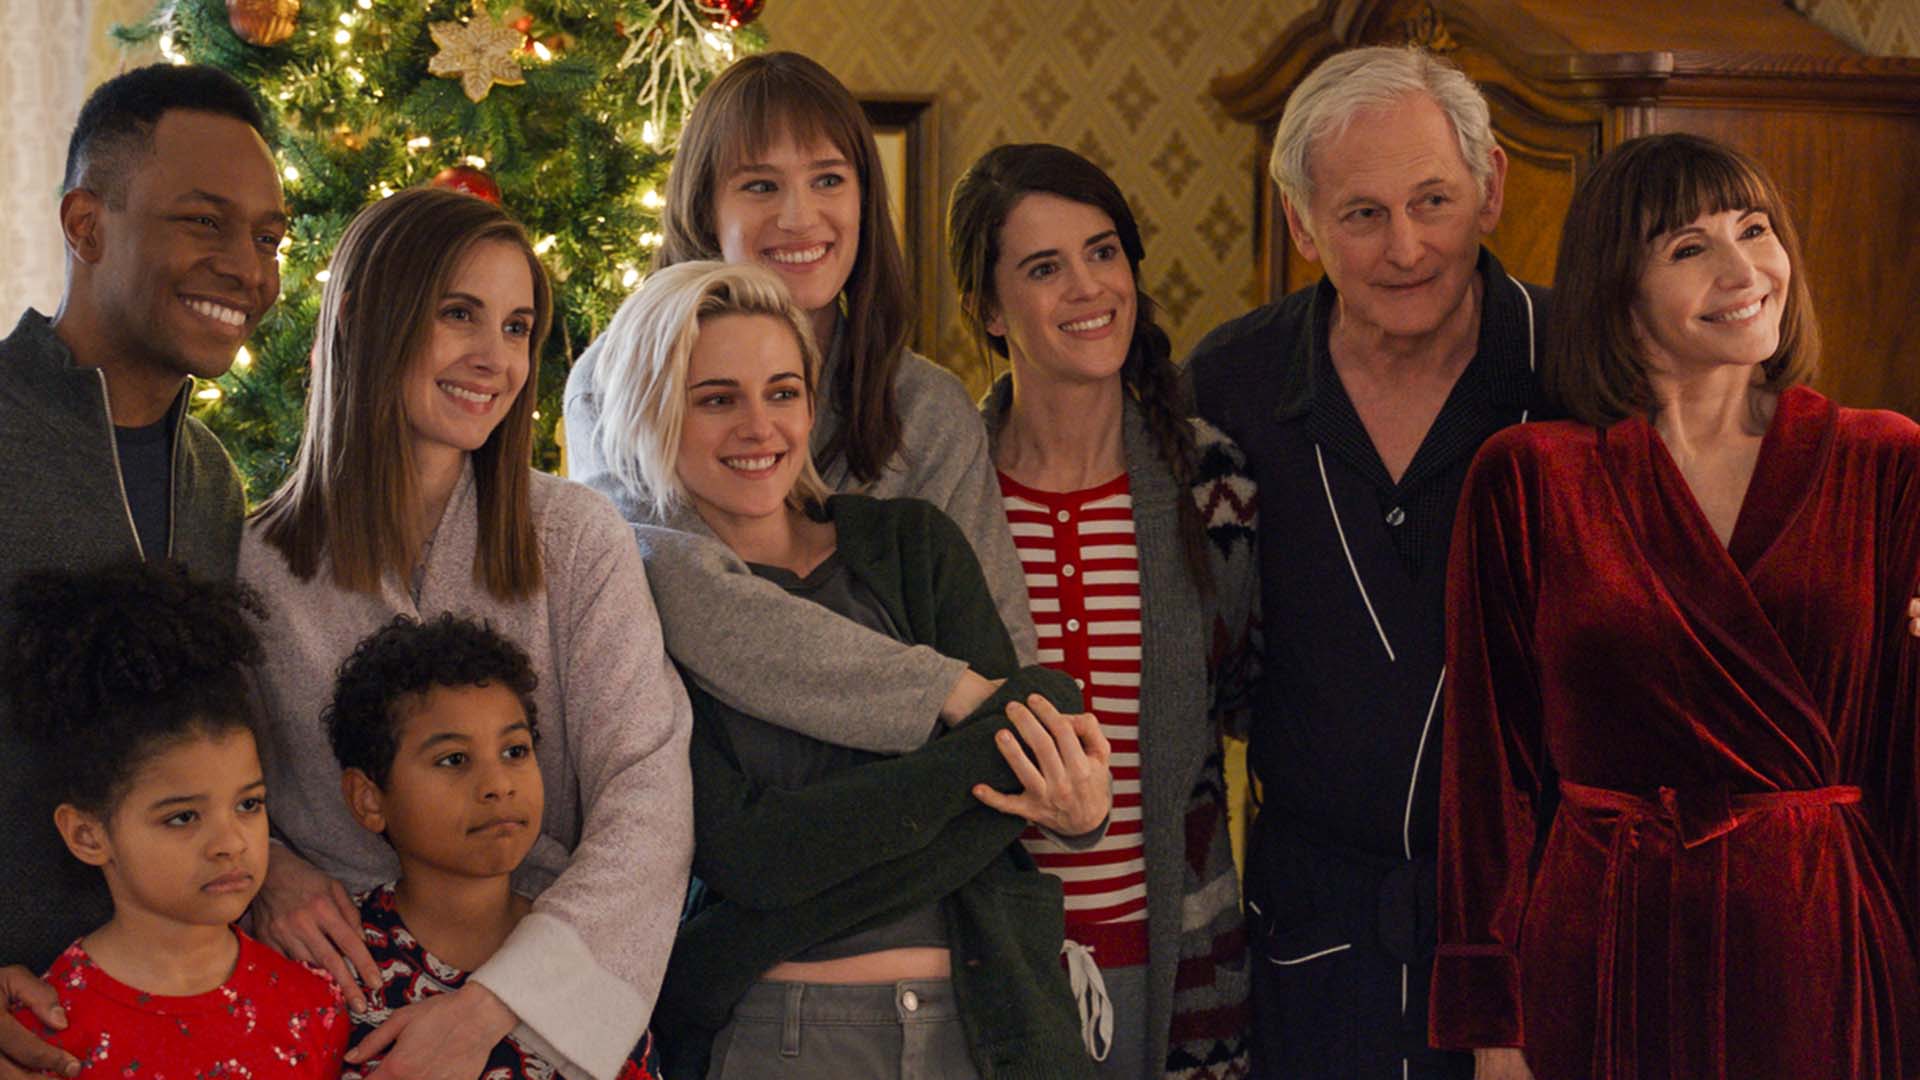 The Trailer for Christmas Rom-Com 'Happiest Season' Has Arrived to Give This Year Some Festive Cheer